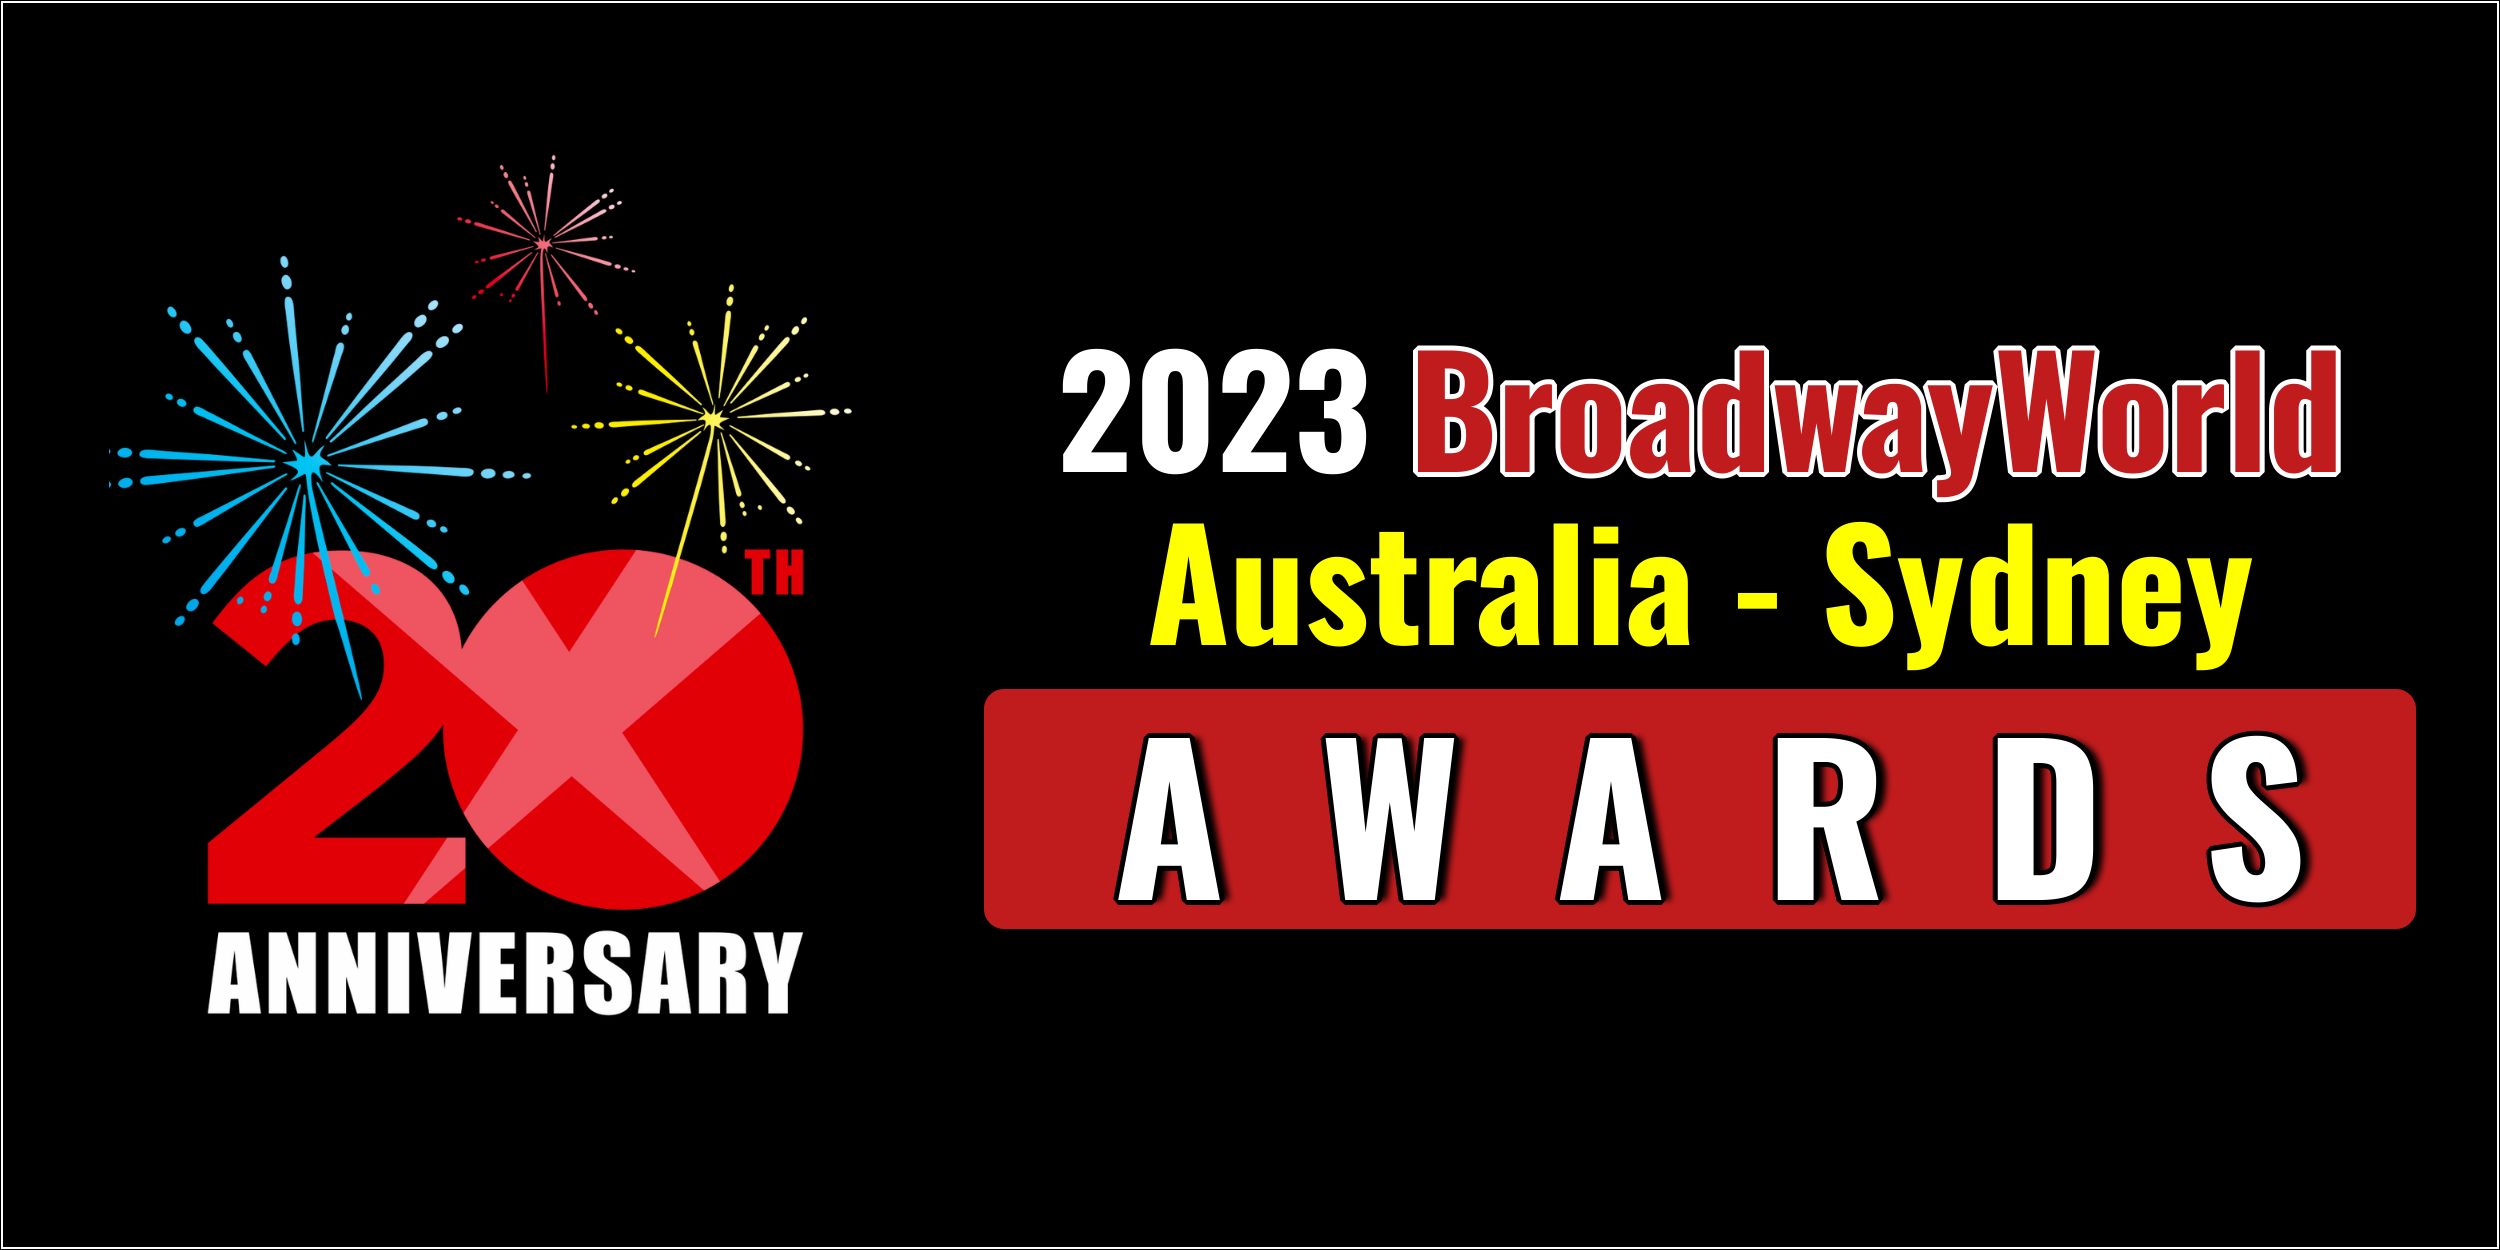 Latest Standings Announced For The 2023 BroadwayWorld Australia - Sydney Awards; FORGETTING TIM MINCHIN Leads Best Play! 